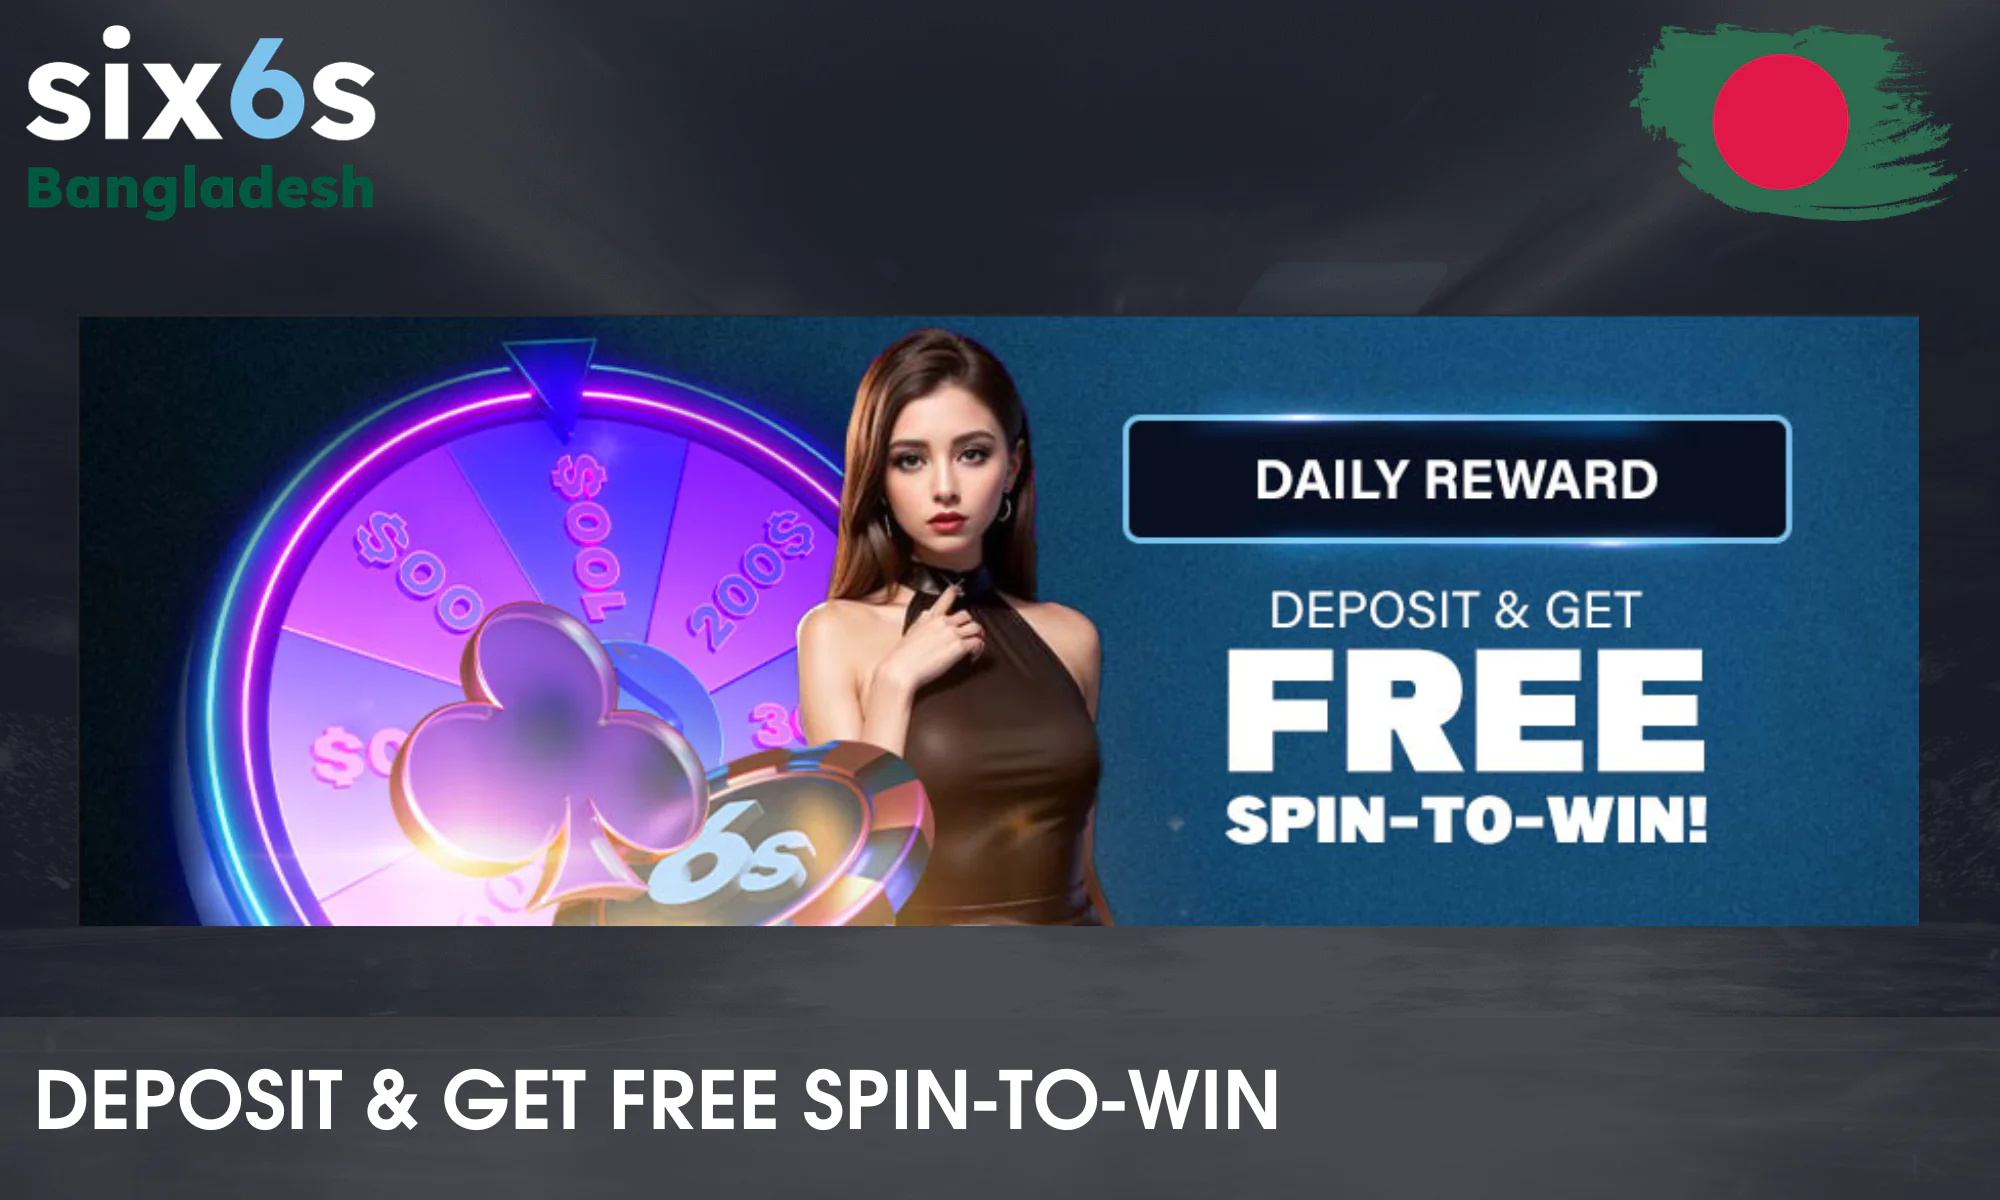 Deposit ৳1,000 or more and get free spins from Six6s